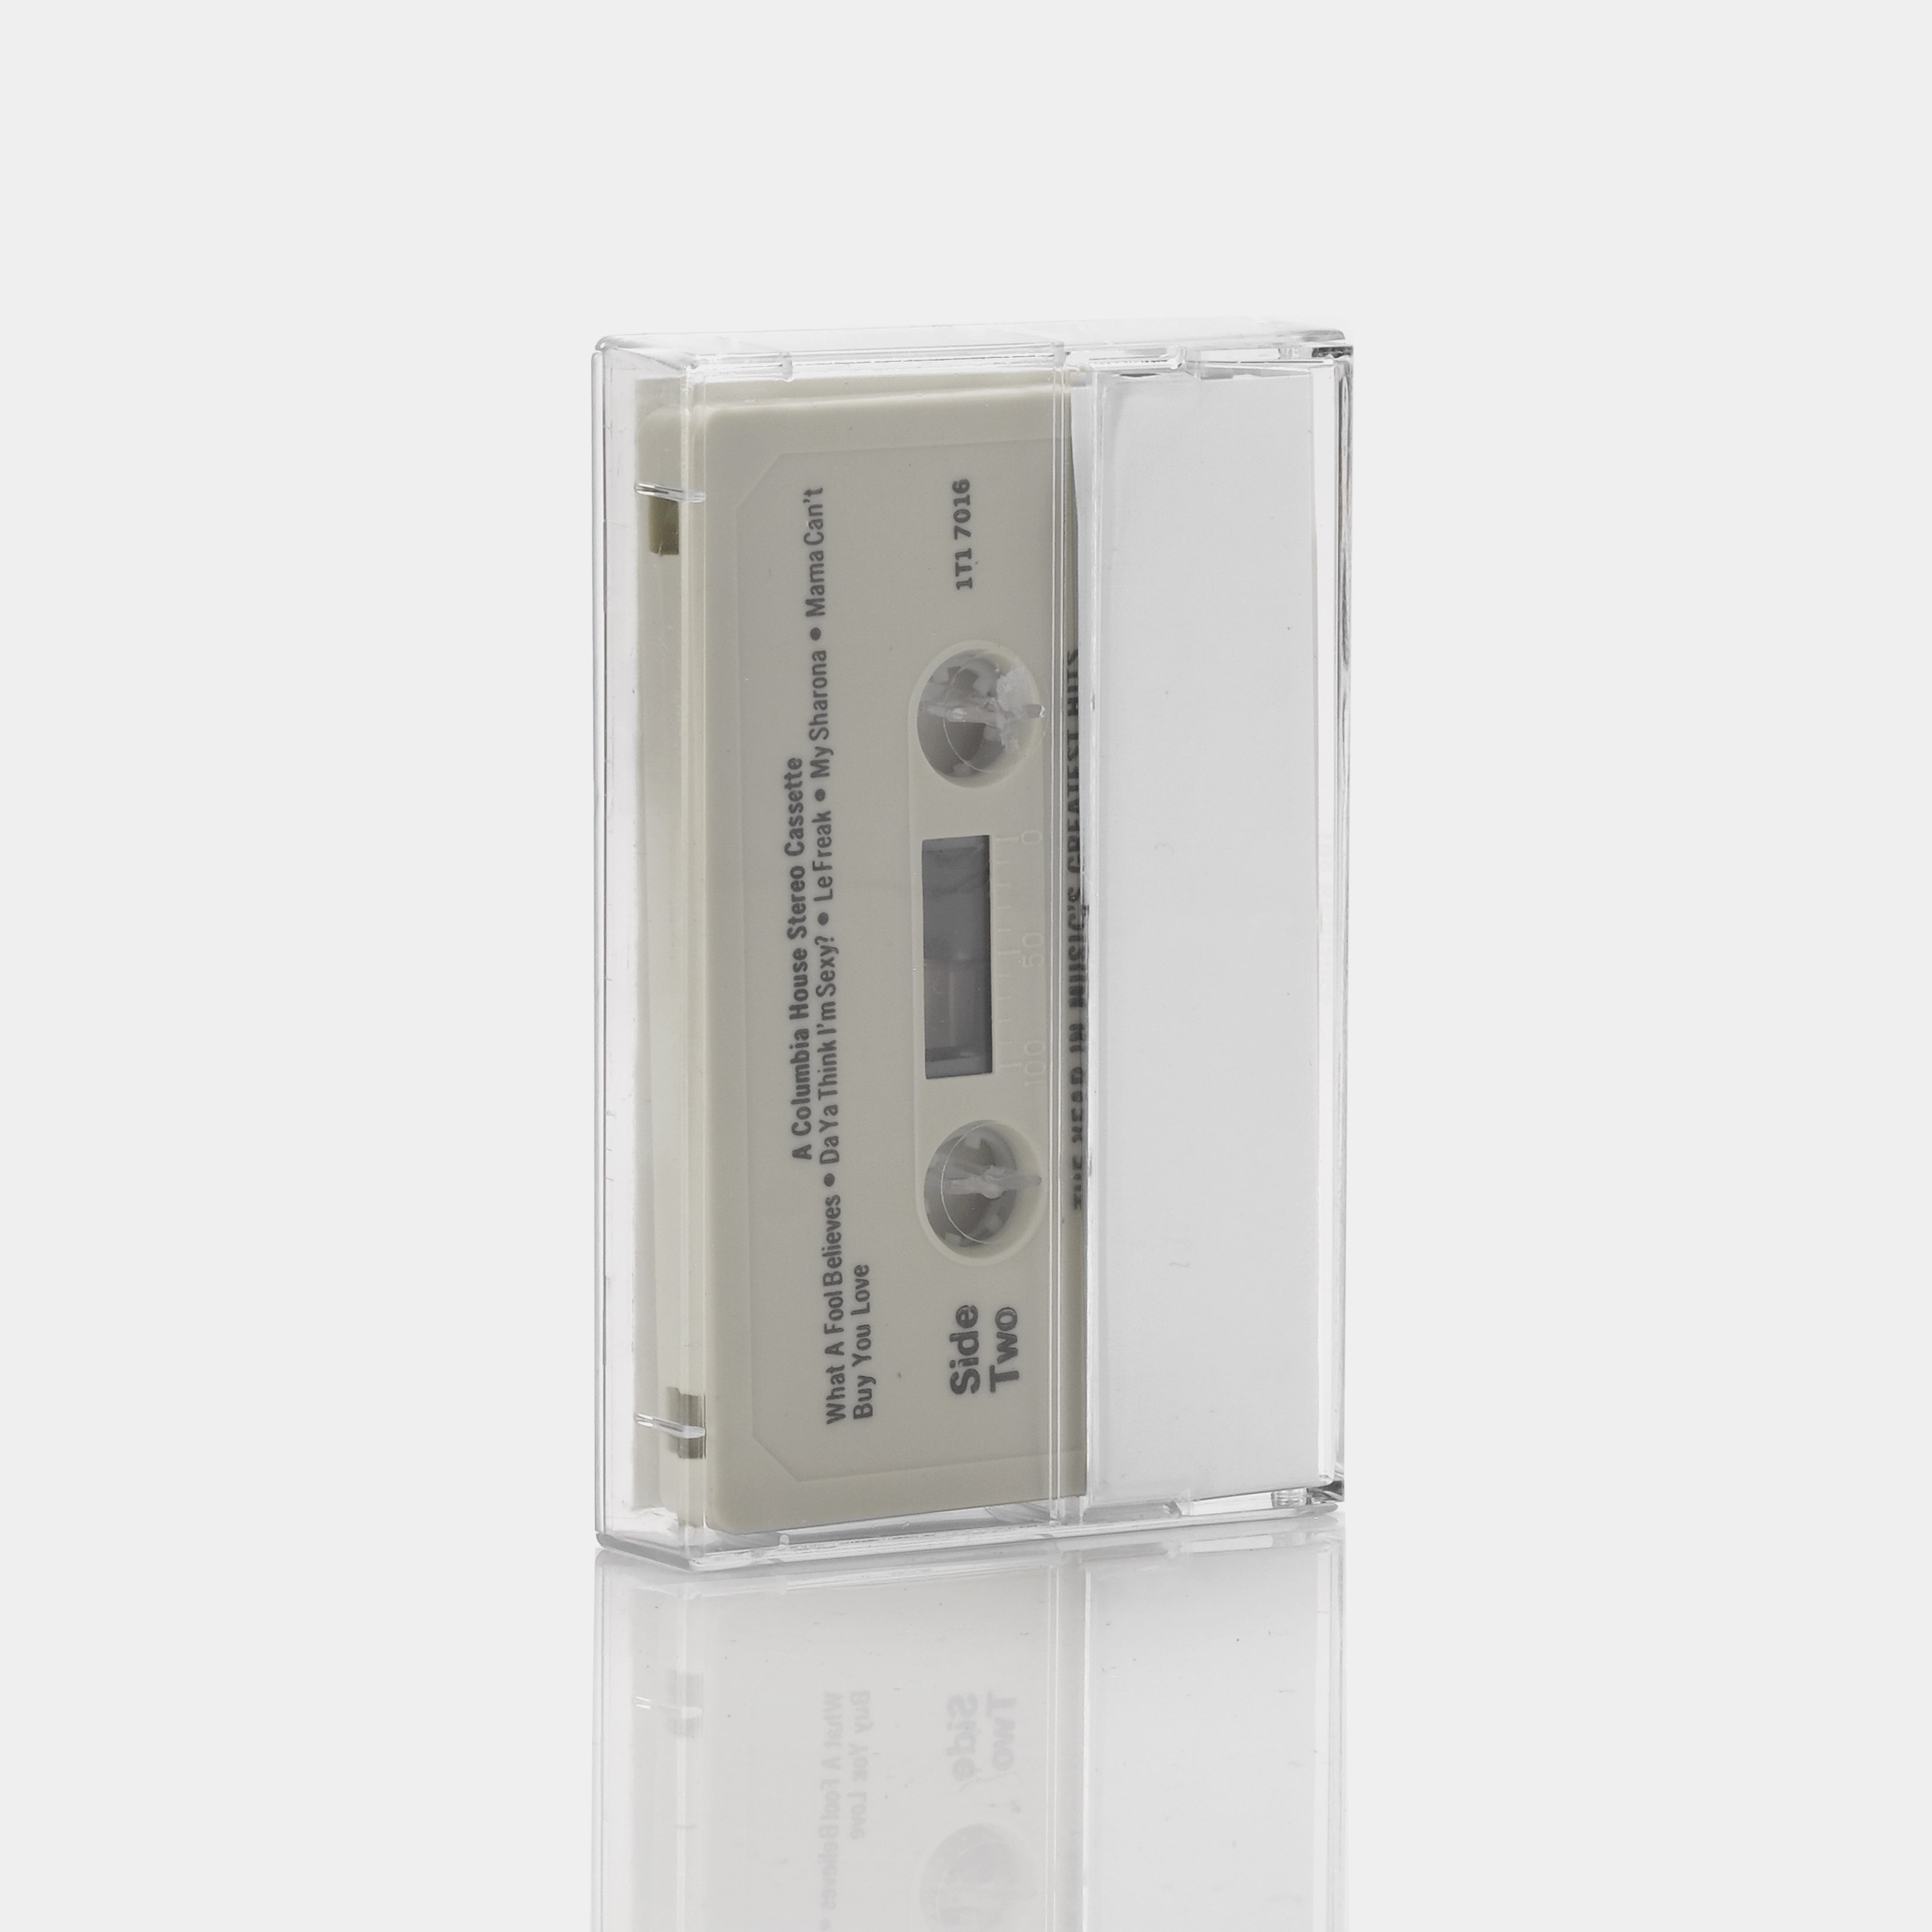 The Realistics - The Year In Music's Greatest Hits Cassette Tape